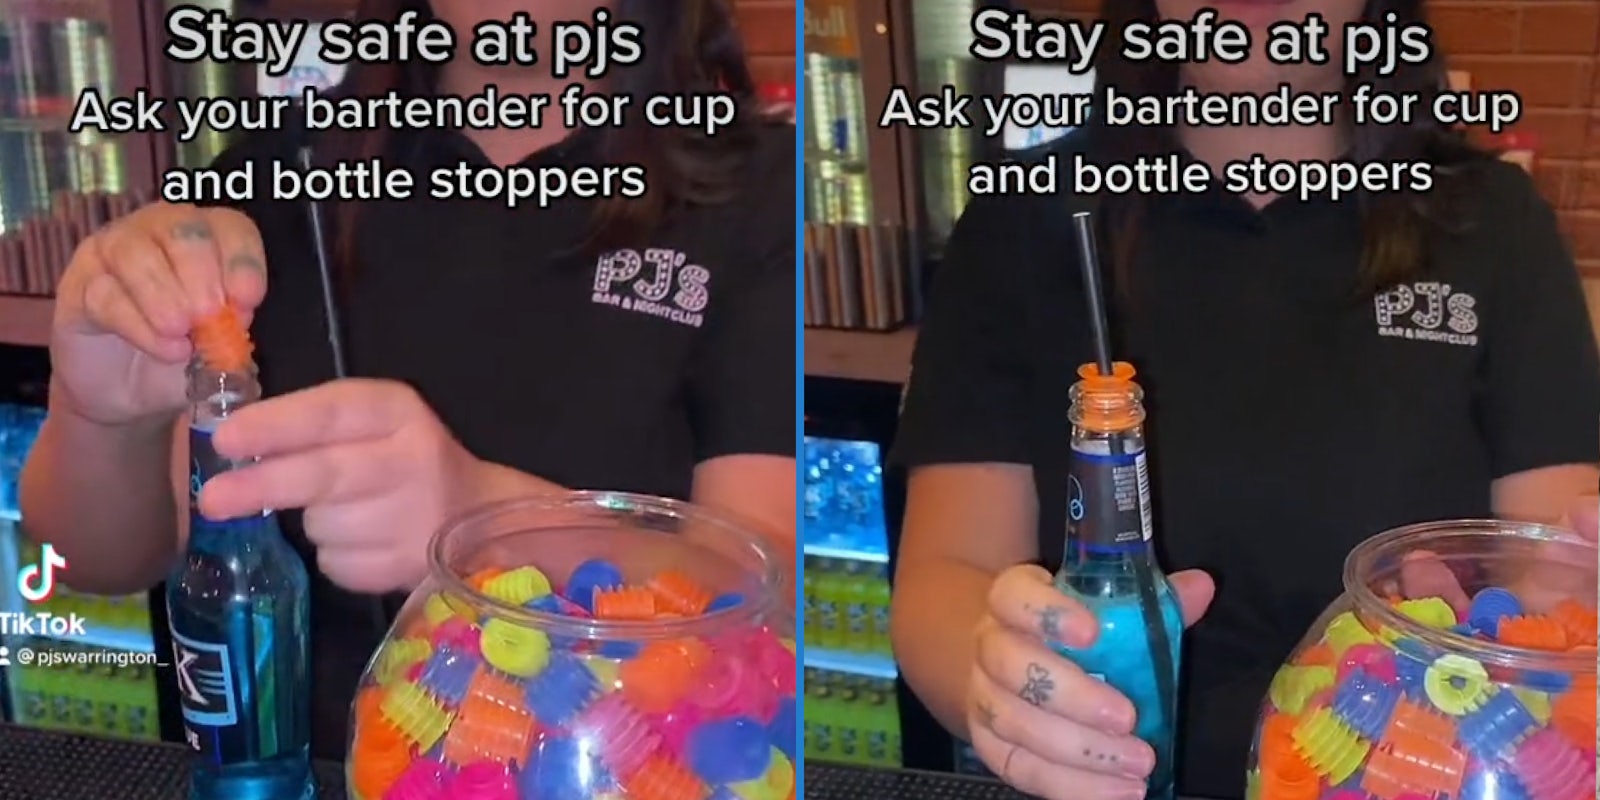 Woman holding bottle at bar putting stopper into top of bottle caption 'Stay safe at pj's Ask your bartender for cup and bottle stoppers' (l) Woman at bar holding bottle with stopper and straw in it caption 'Stay safe at pj's Ask your bartender for cup and bottle stoppers' (r)